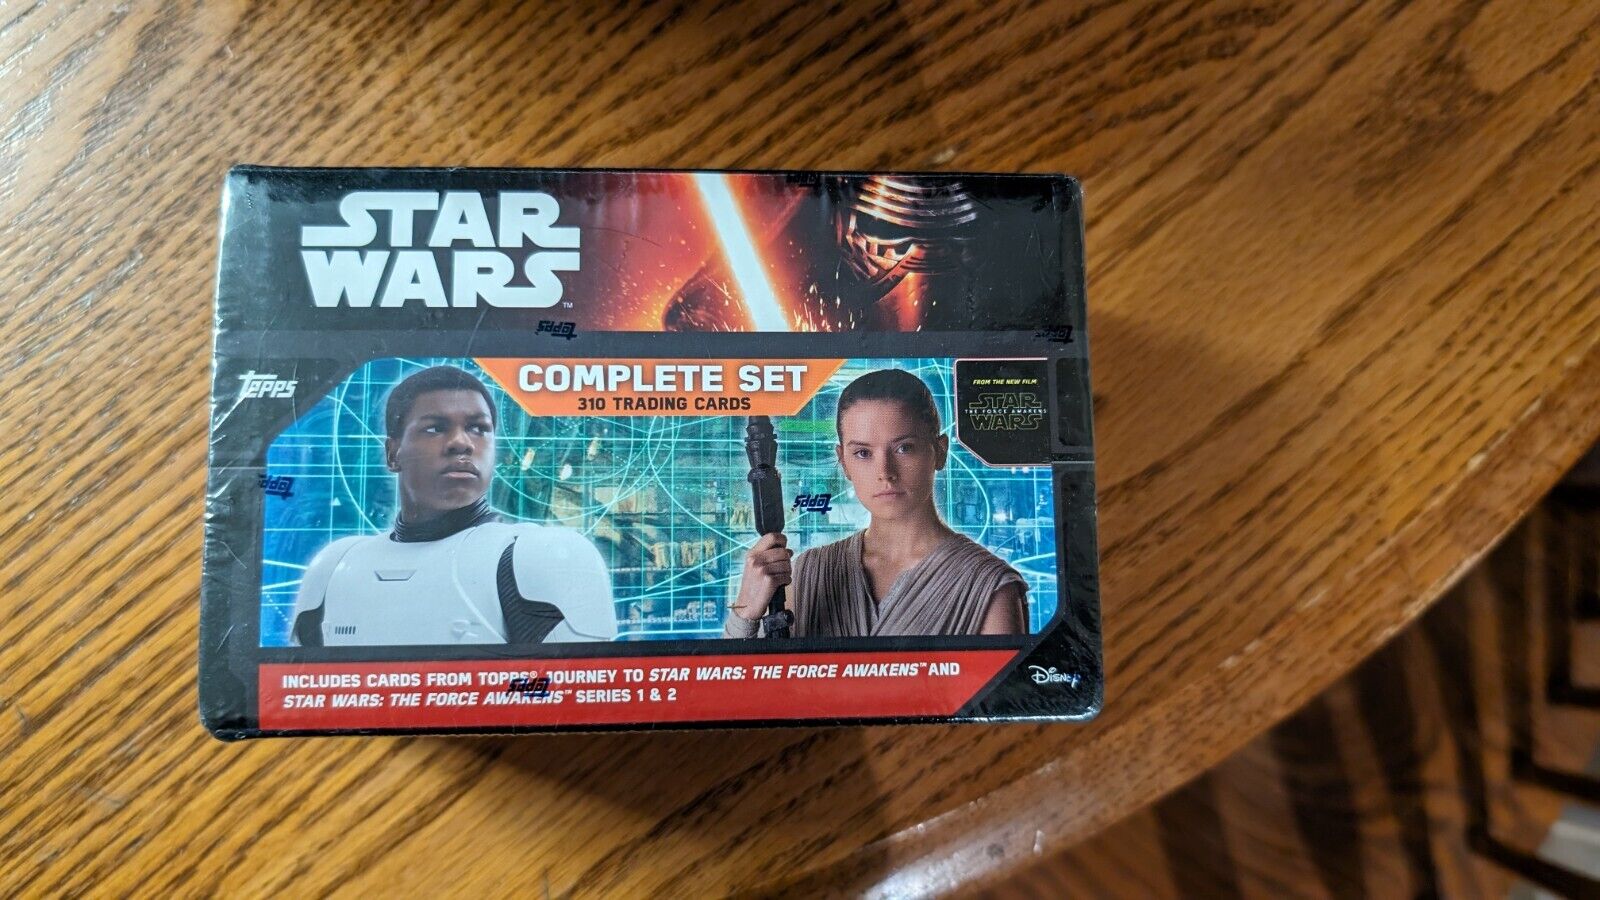 2016 Topps STAR WARS THE FORCE AWAKENS Factory Sealed COMPLETE SET-310 cards New